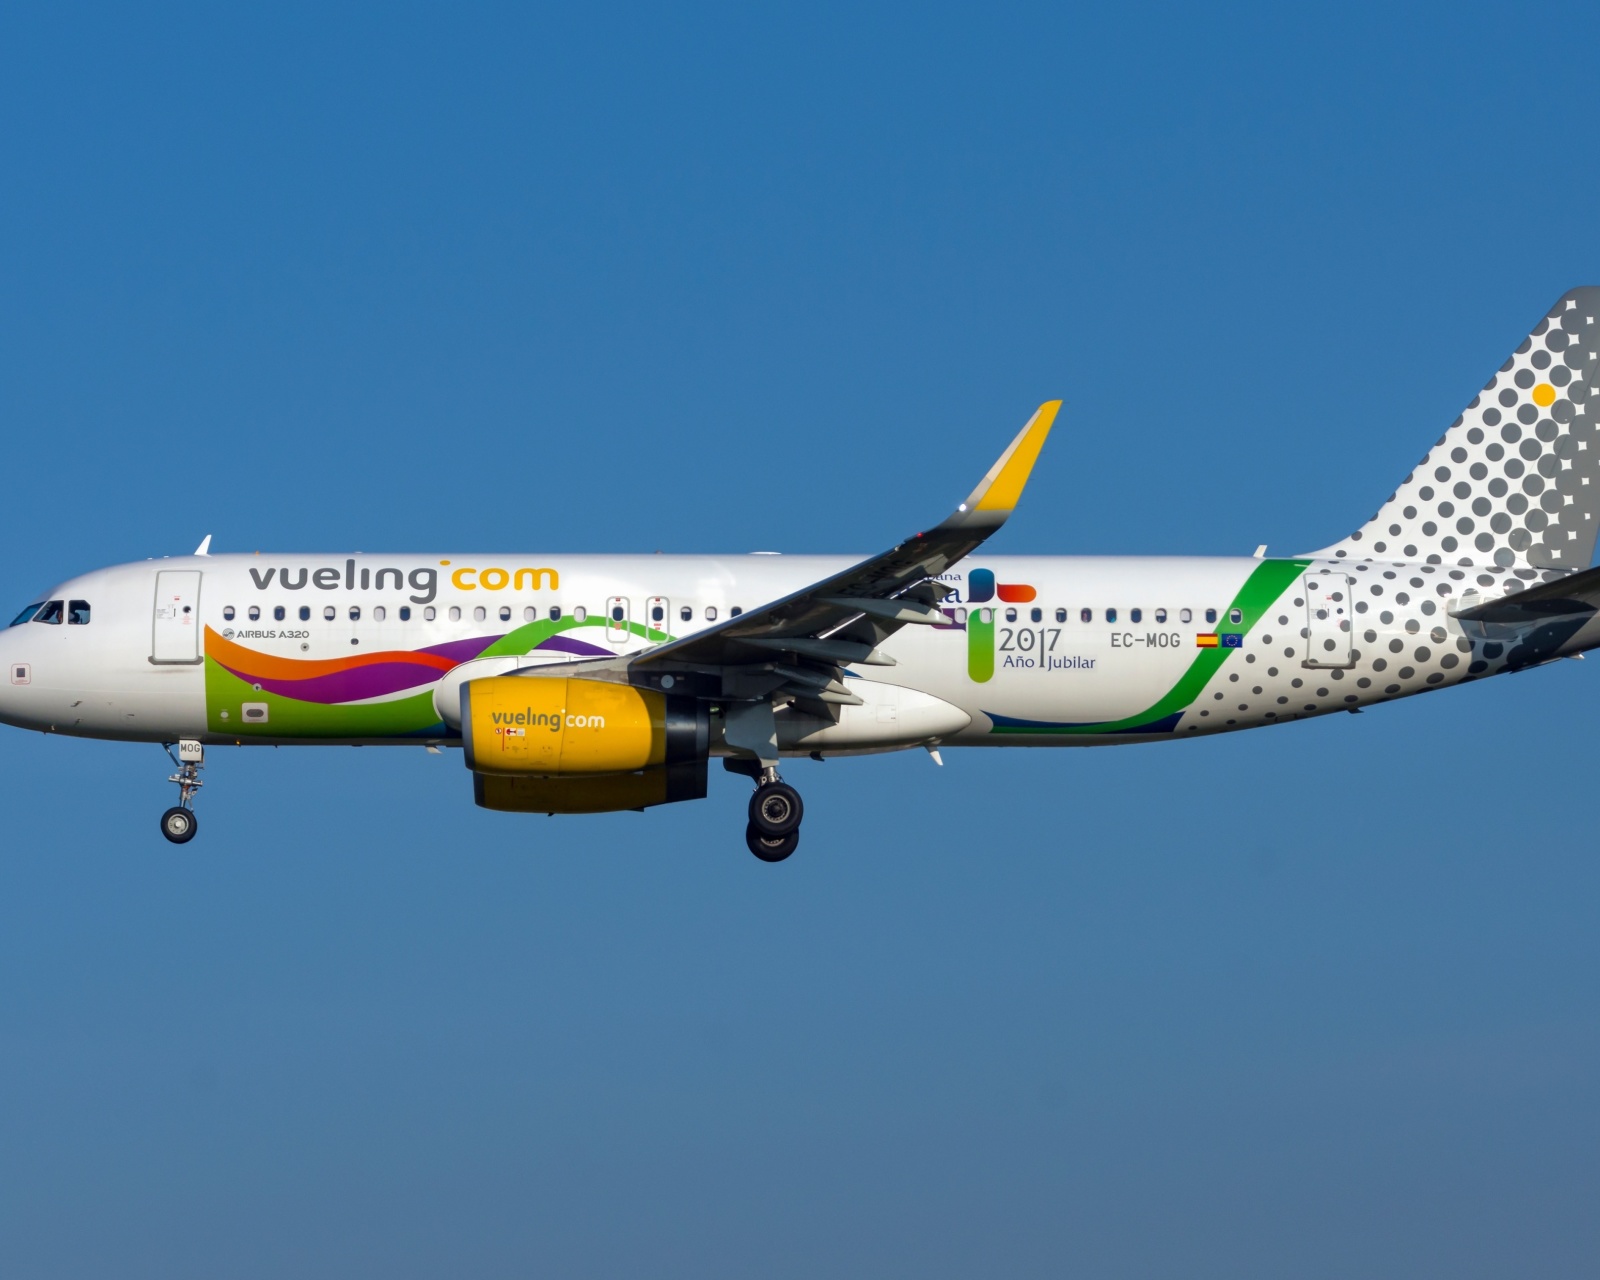 Airbus A320 Vueling Airlines wallpaper 1600x1280